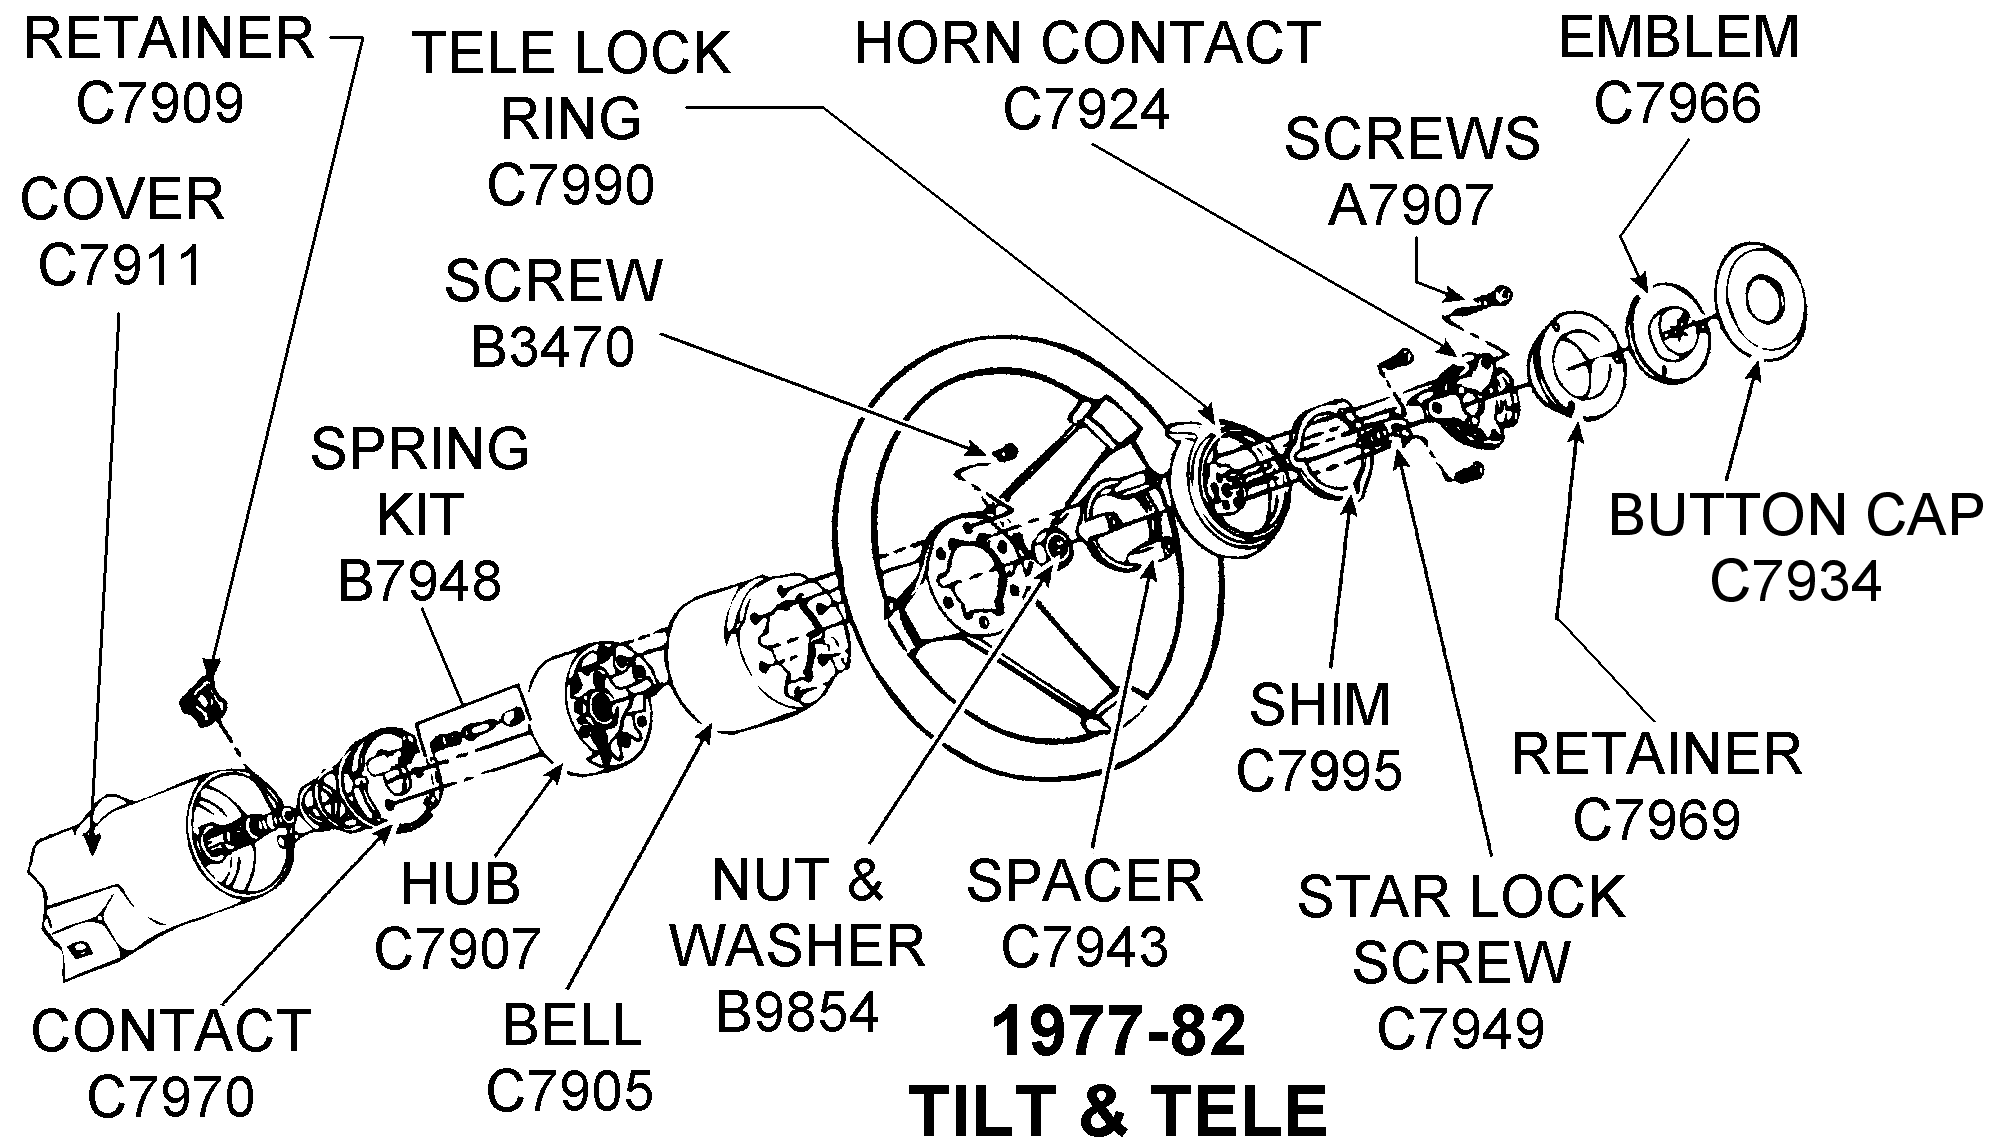 1982 horn repair questions, what are these ... gm tilt column wiring diagrams 